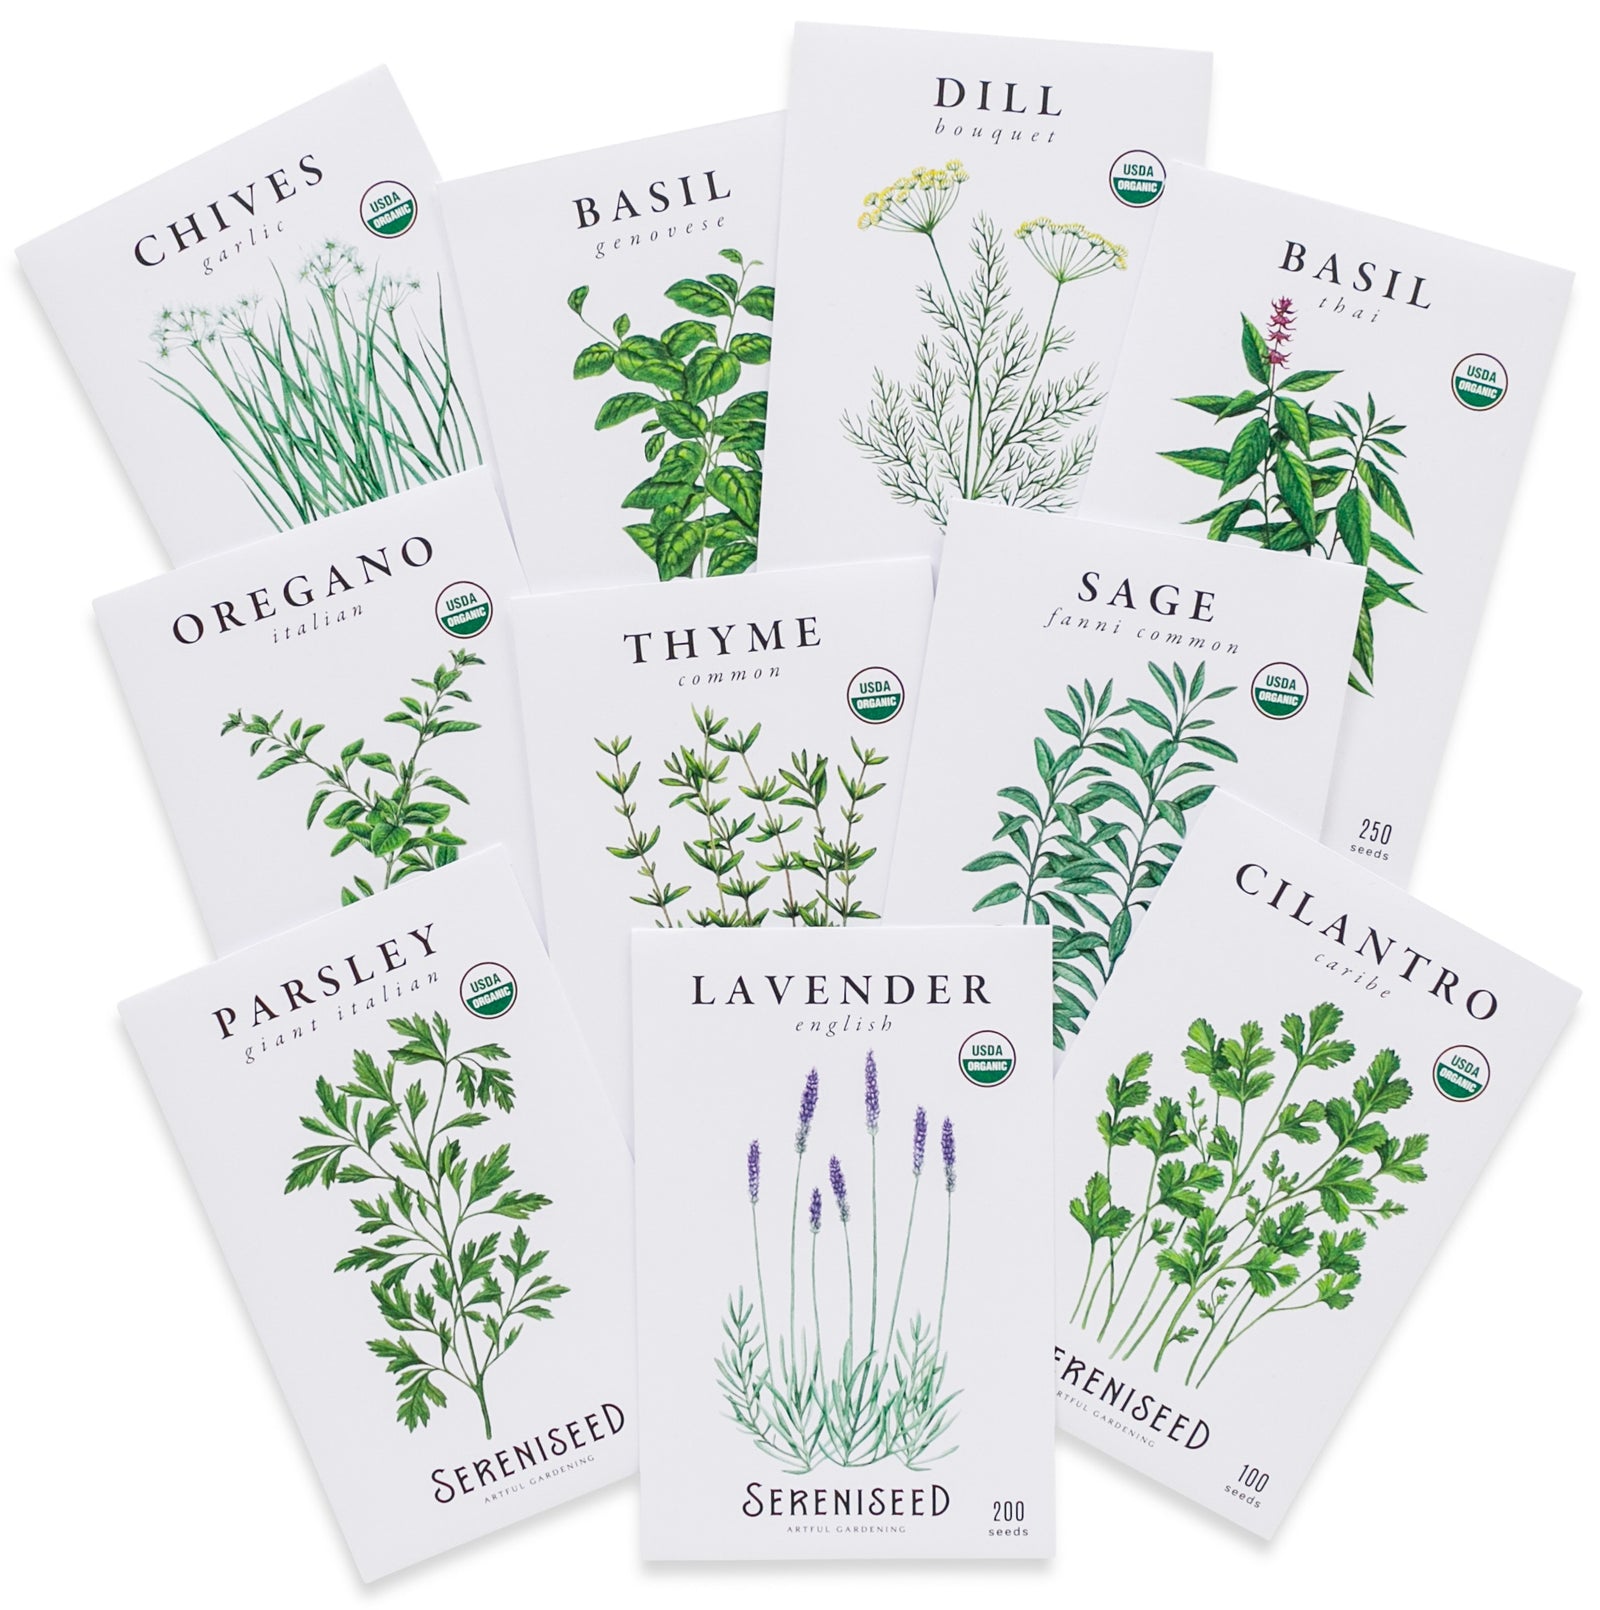 Rosemary Herb, 250 Heirloom Seeds Per Packet, Non GMO Seeds